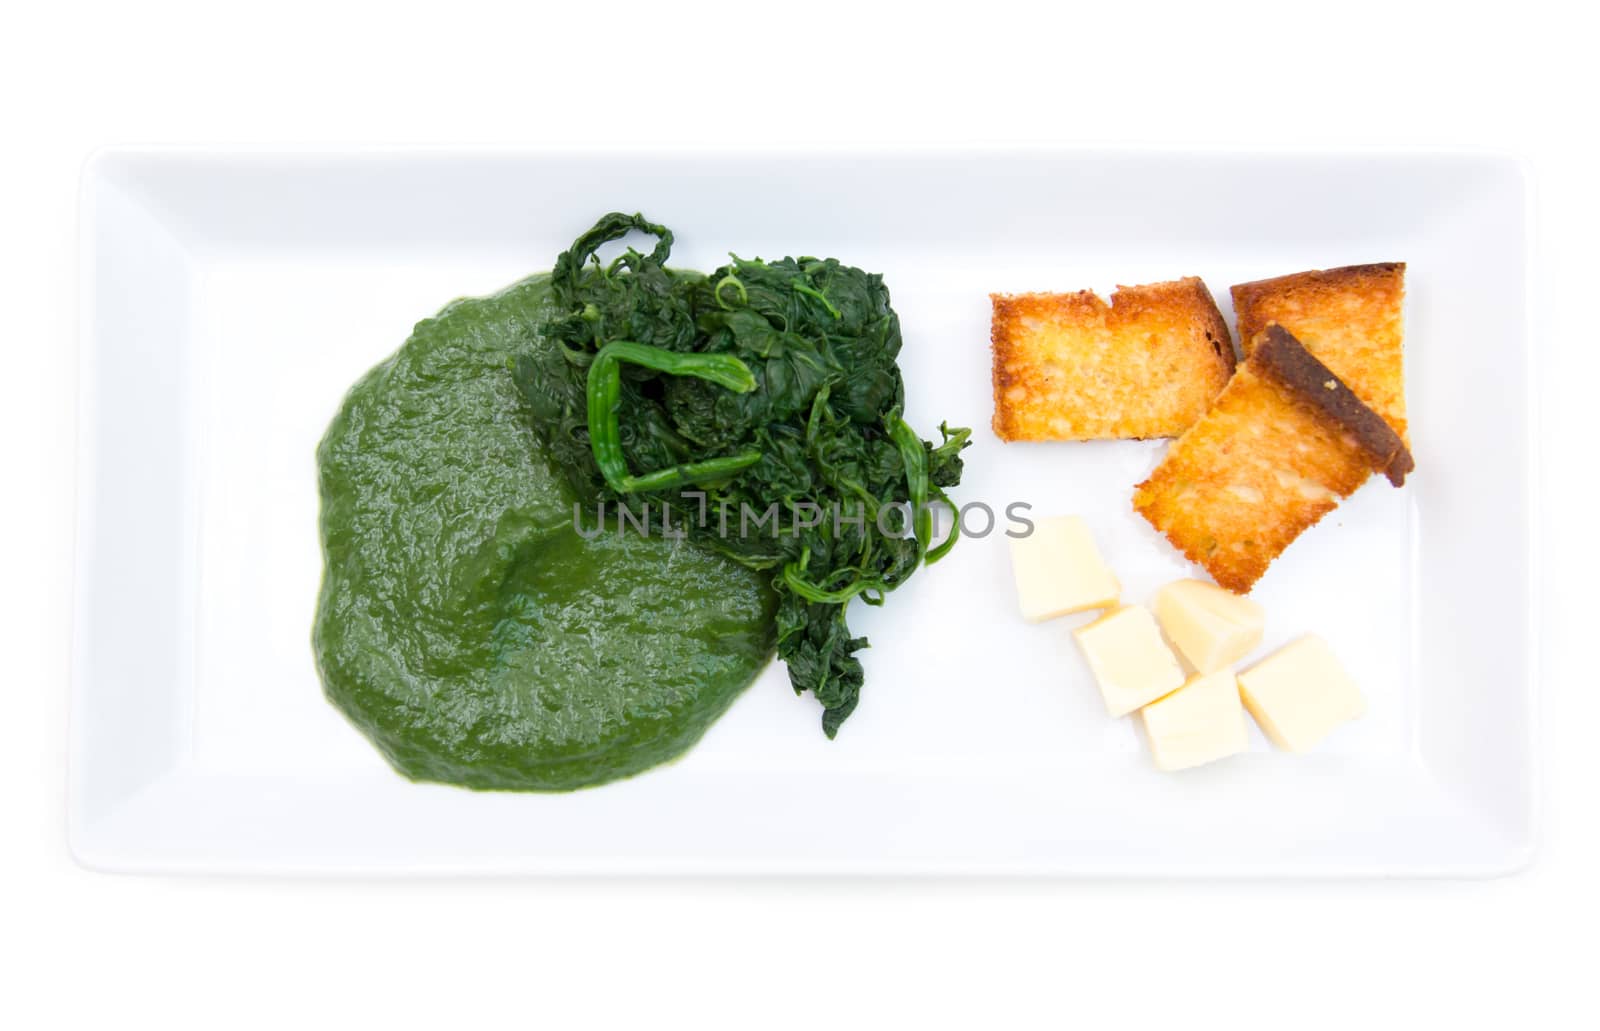 Tray with creamed spinach and croutons on a white background seen from above